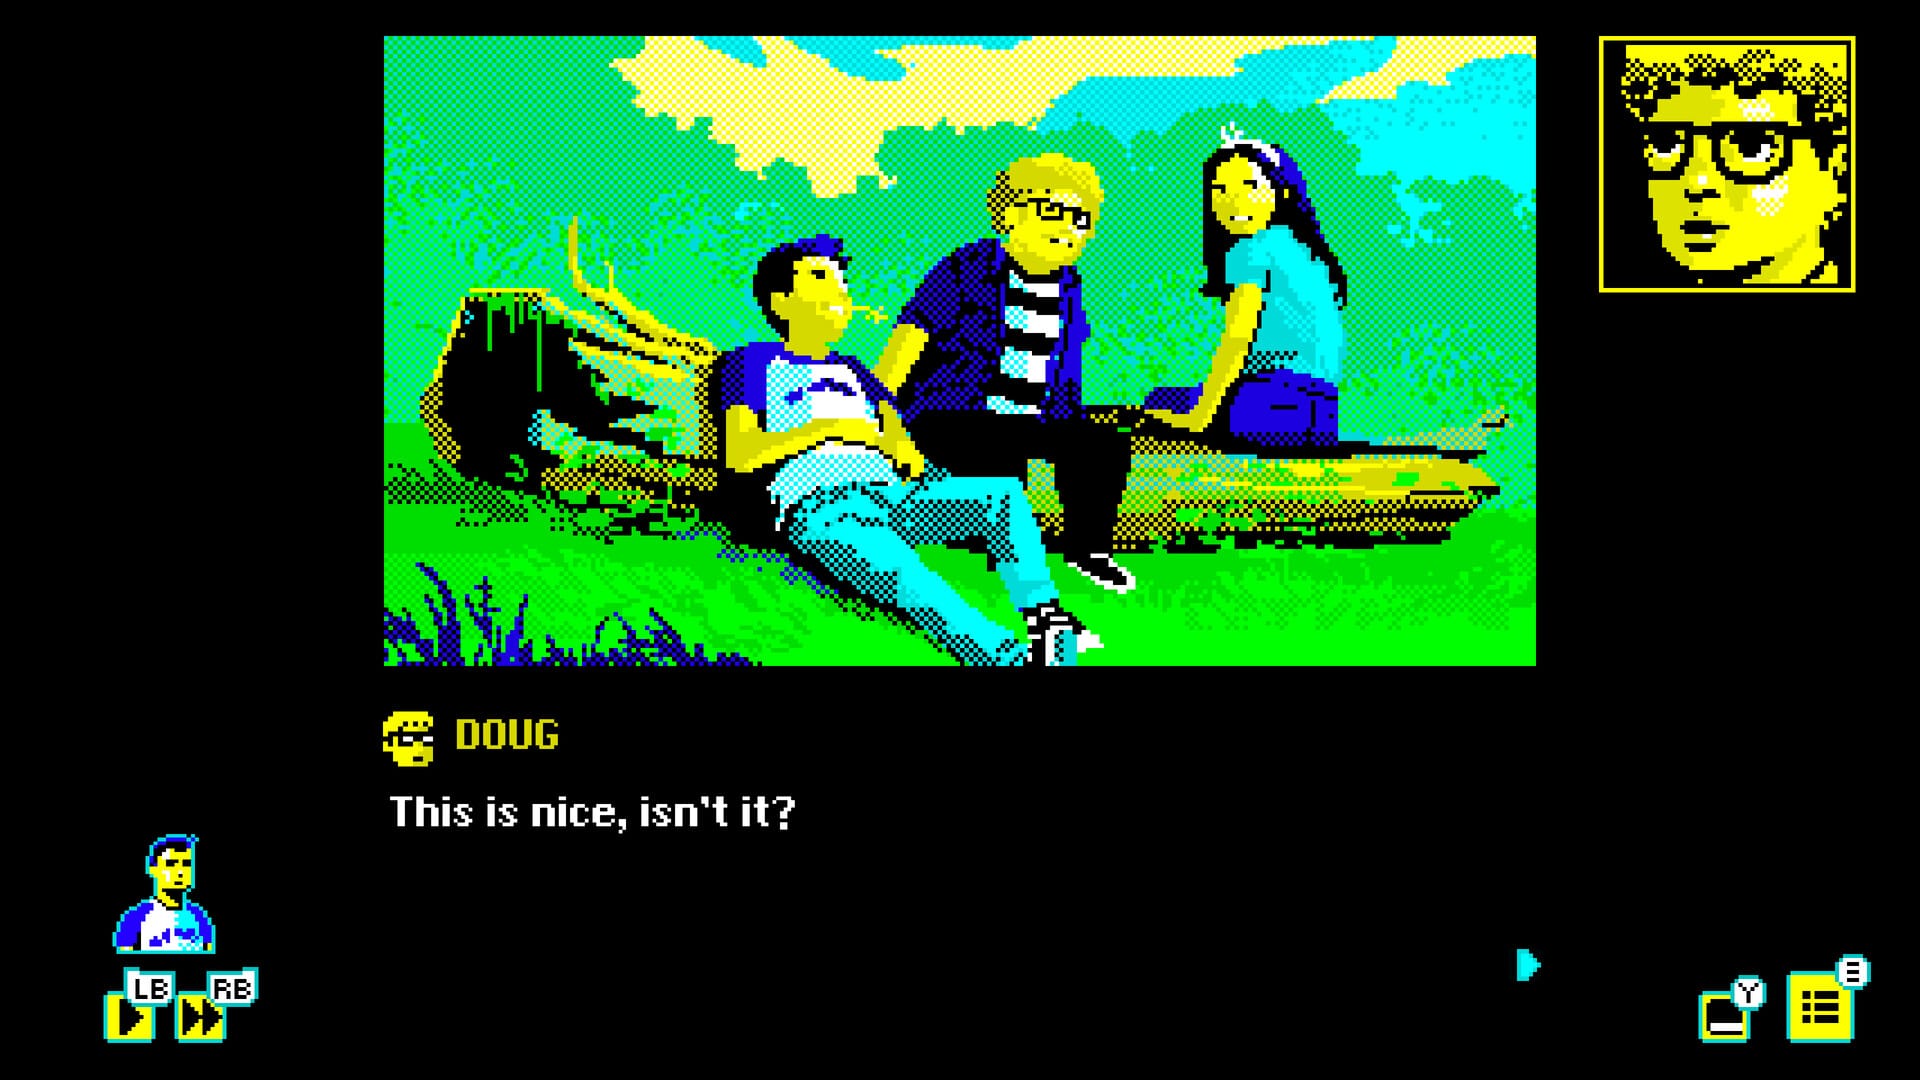 A screenshot from Varney Lake with three characters sitting on a log. Doug says "This is nice, isn't it?"